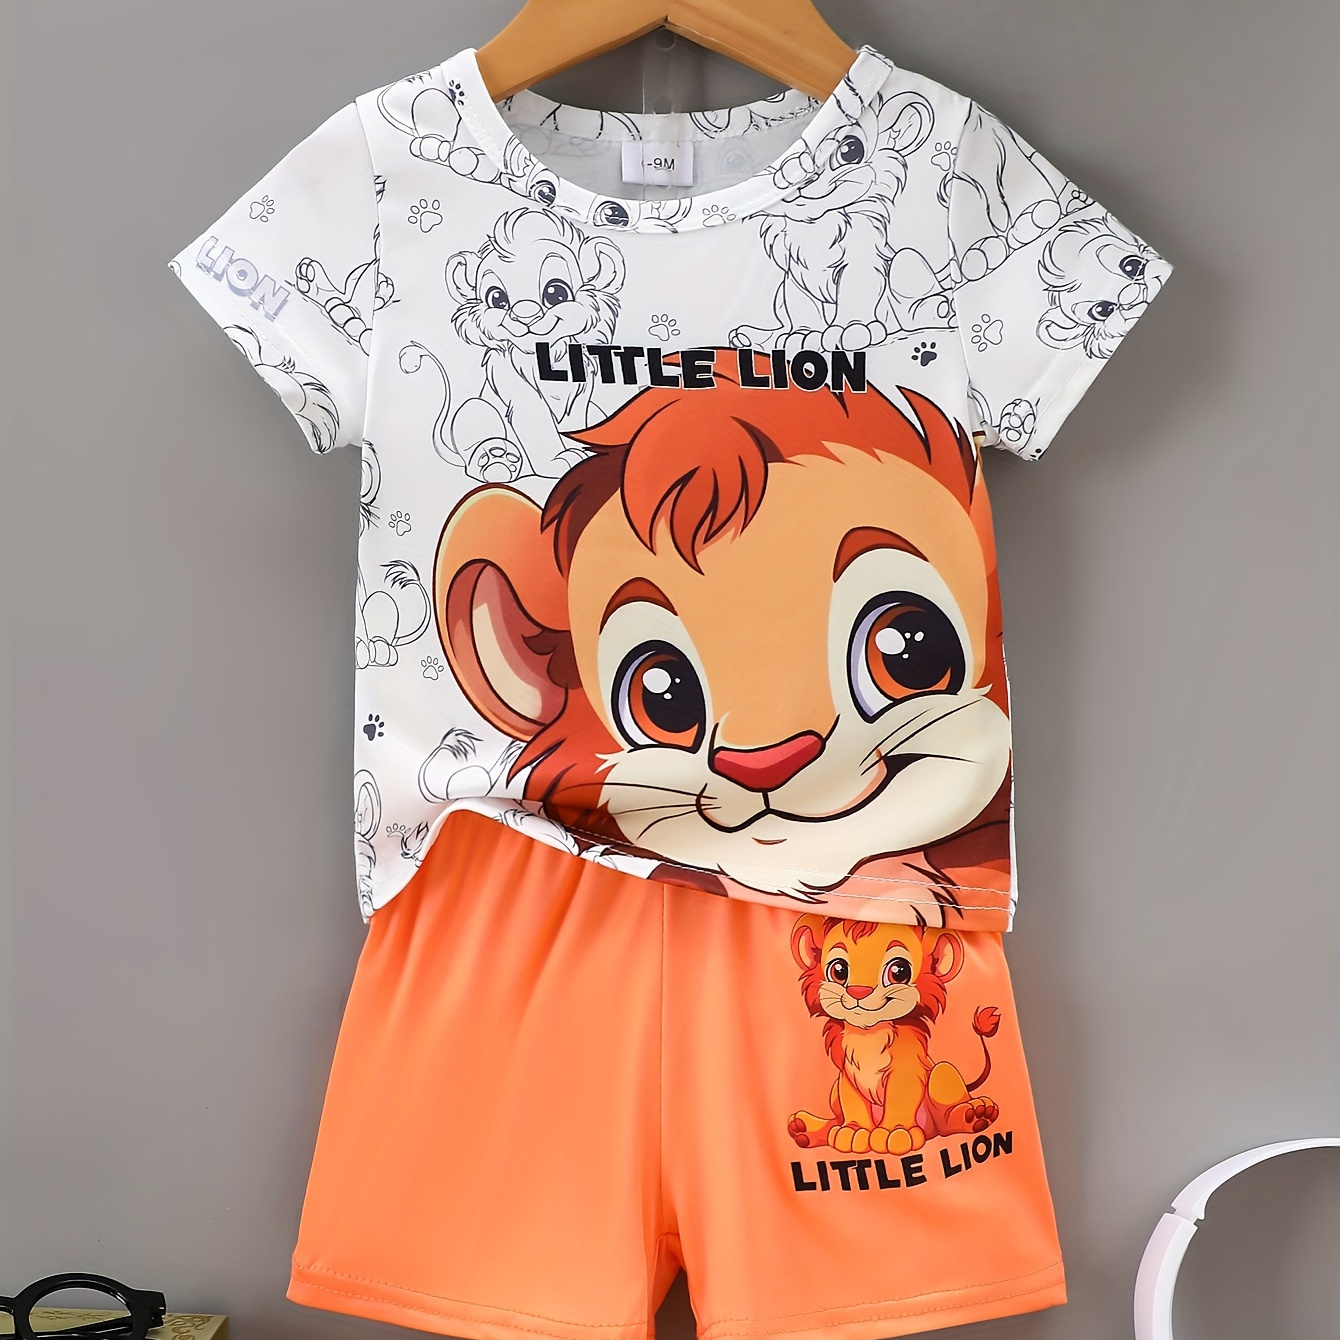 

2pcs Baby Boys Cartoon Lion Print Short Sleeve Top + Solid Color Shorts Set, Casual Outfit For Toddlers, Cute Animal Printed Summer Wear